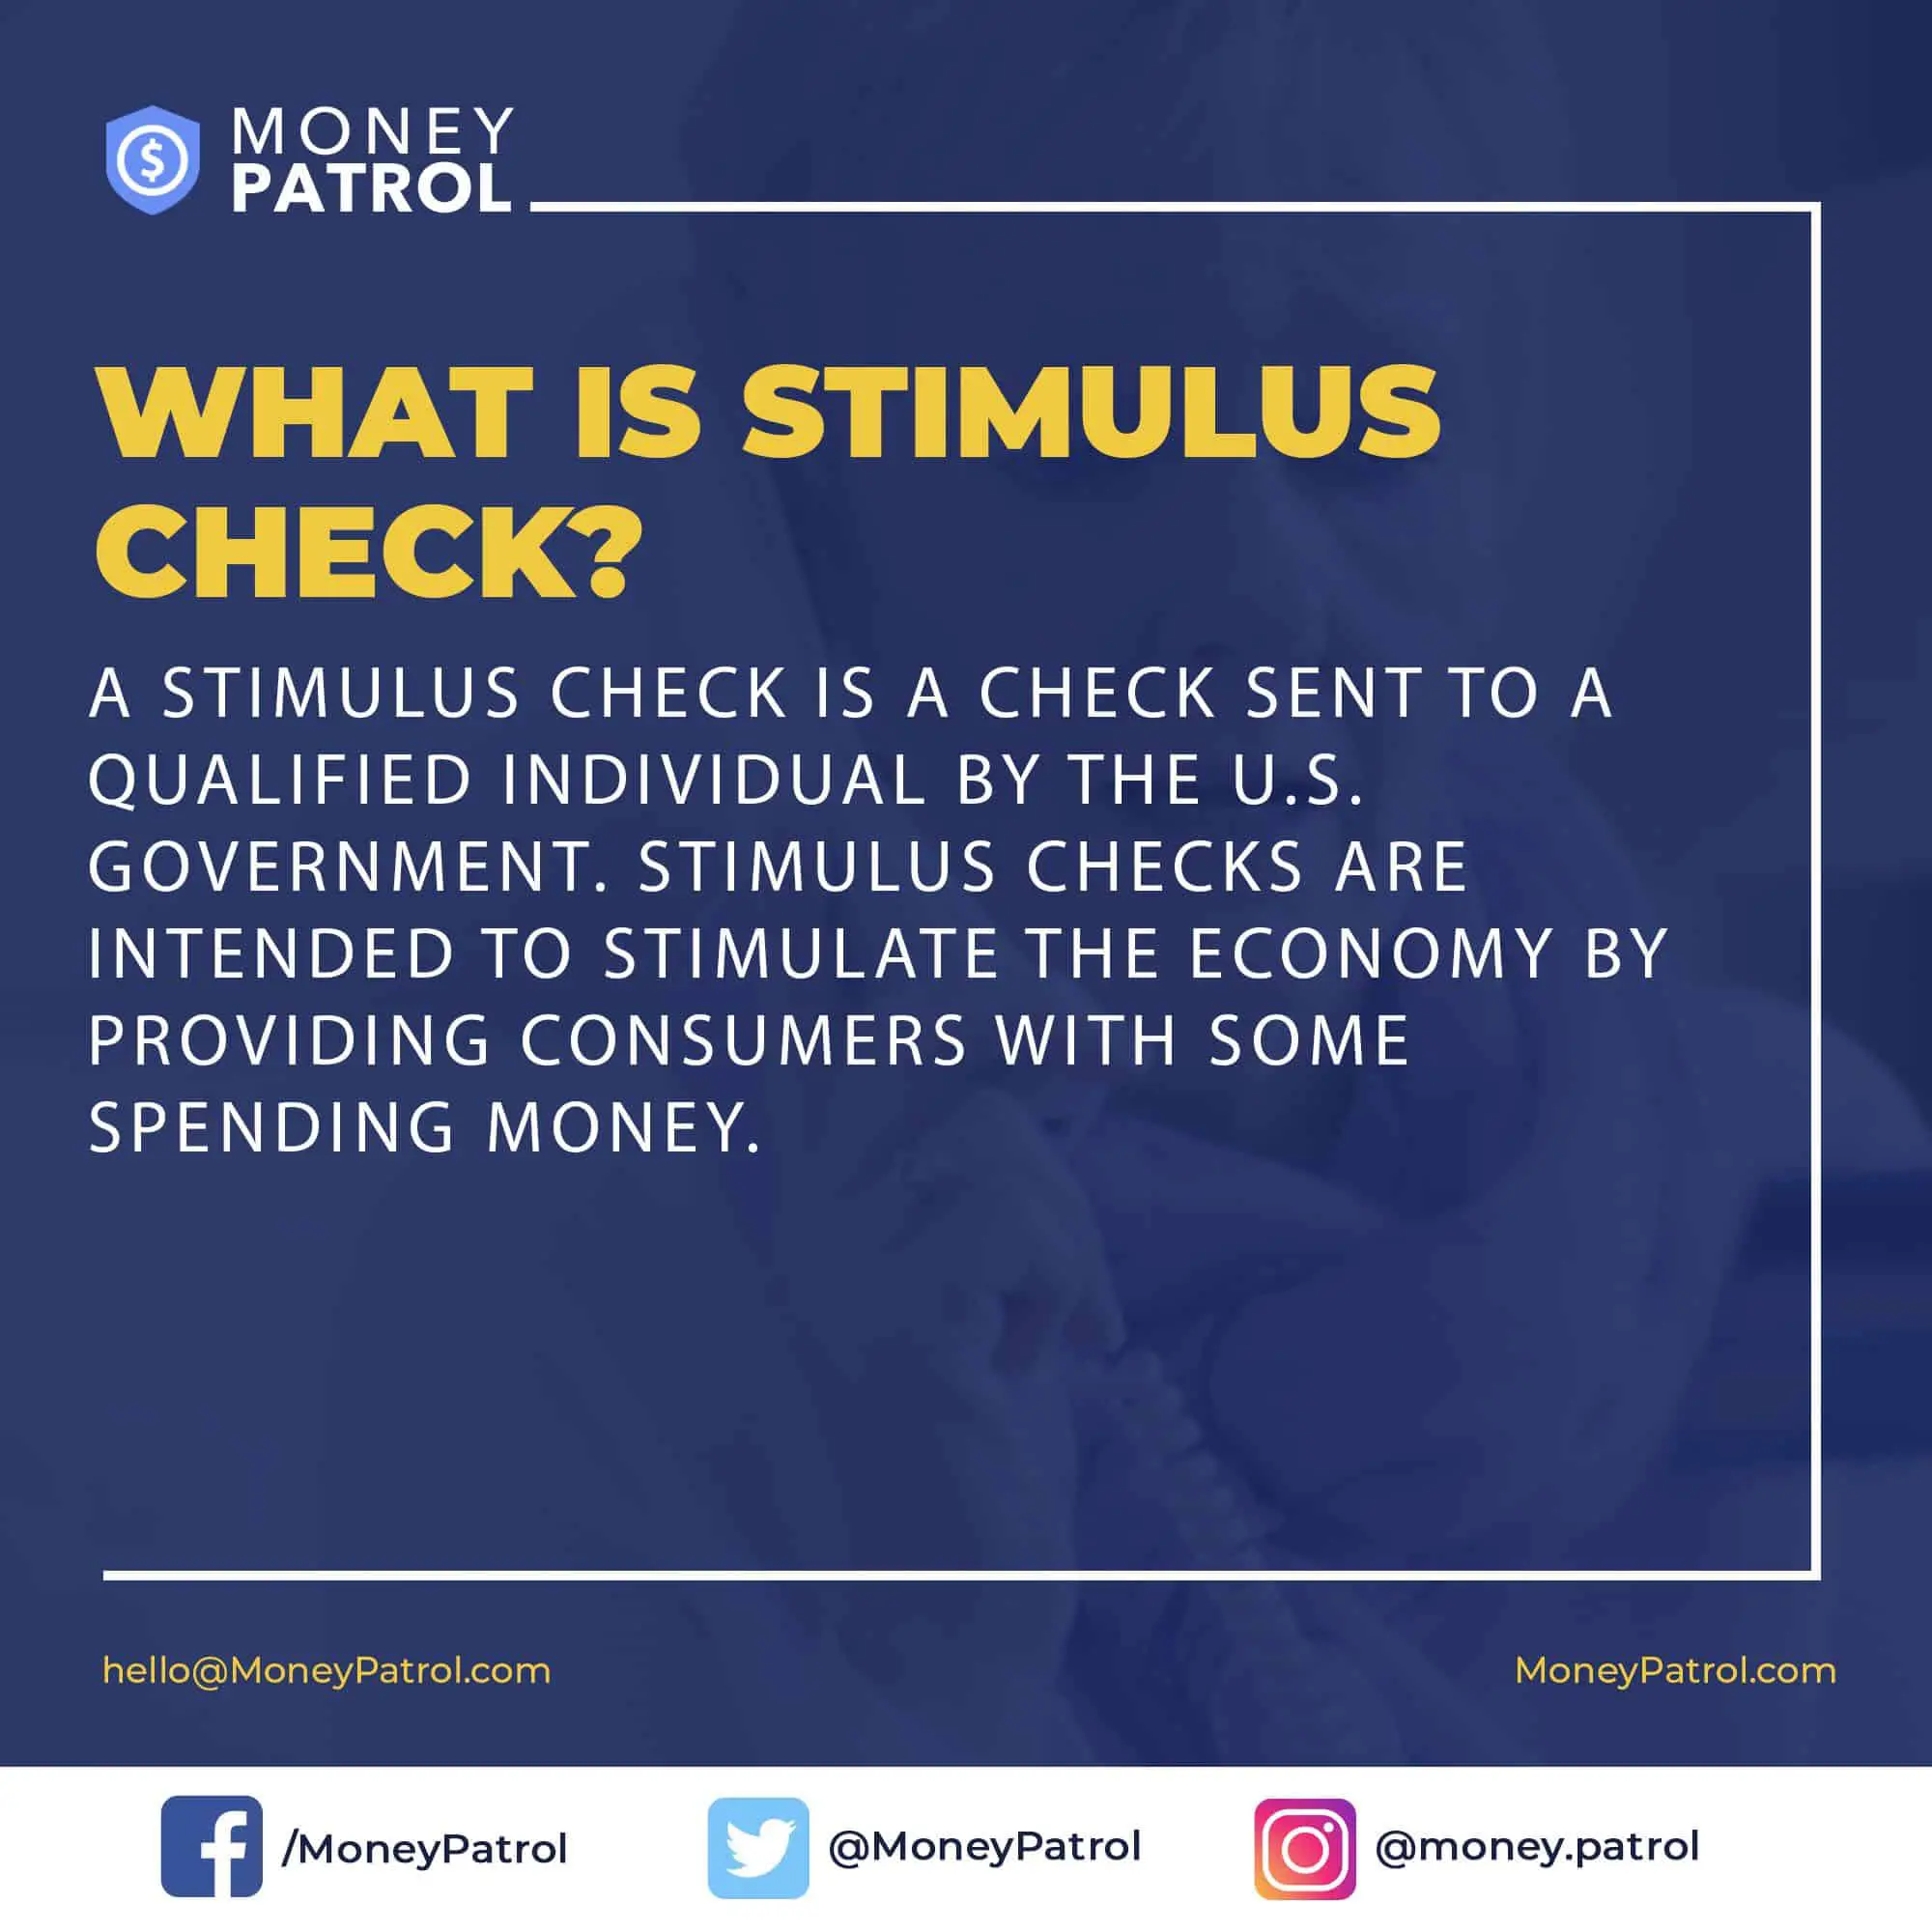 How Can You Be Qualified For The Stimulus Check